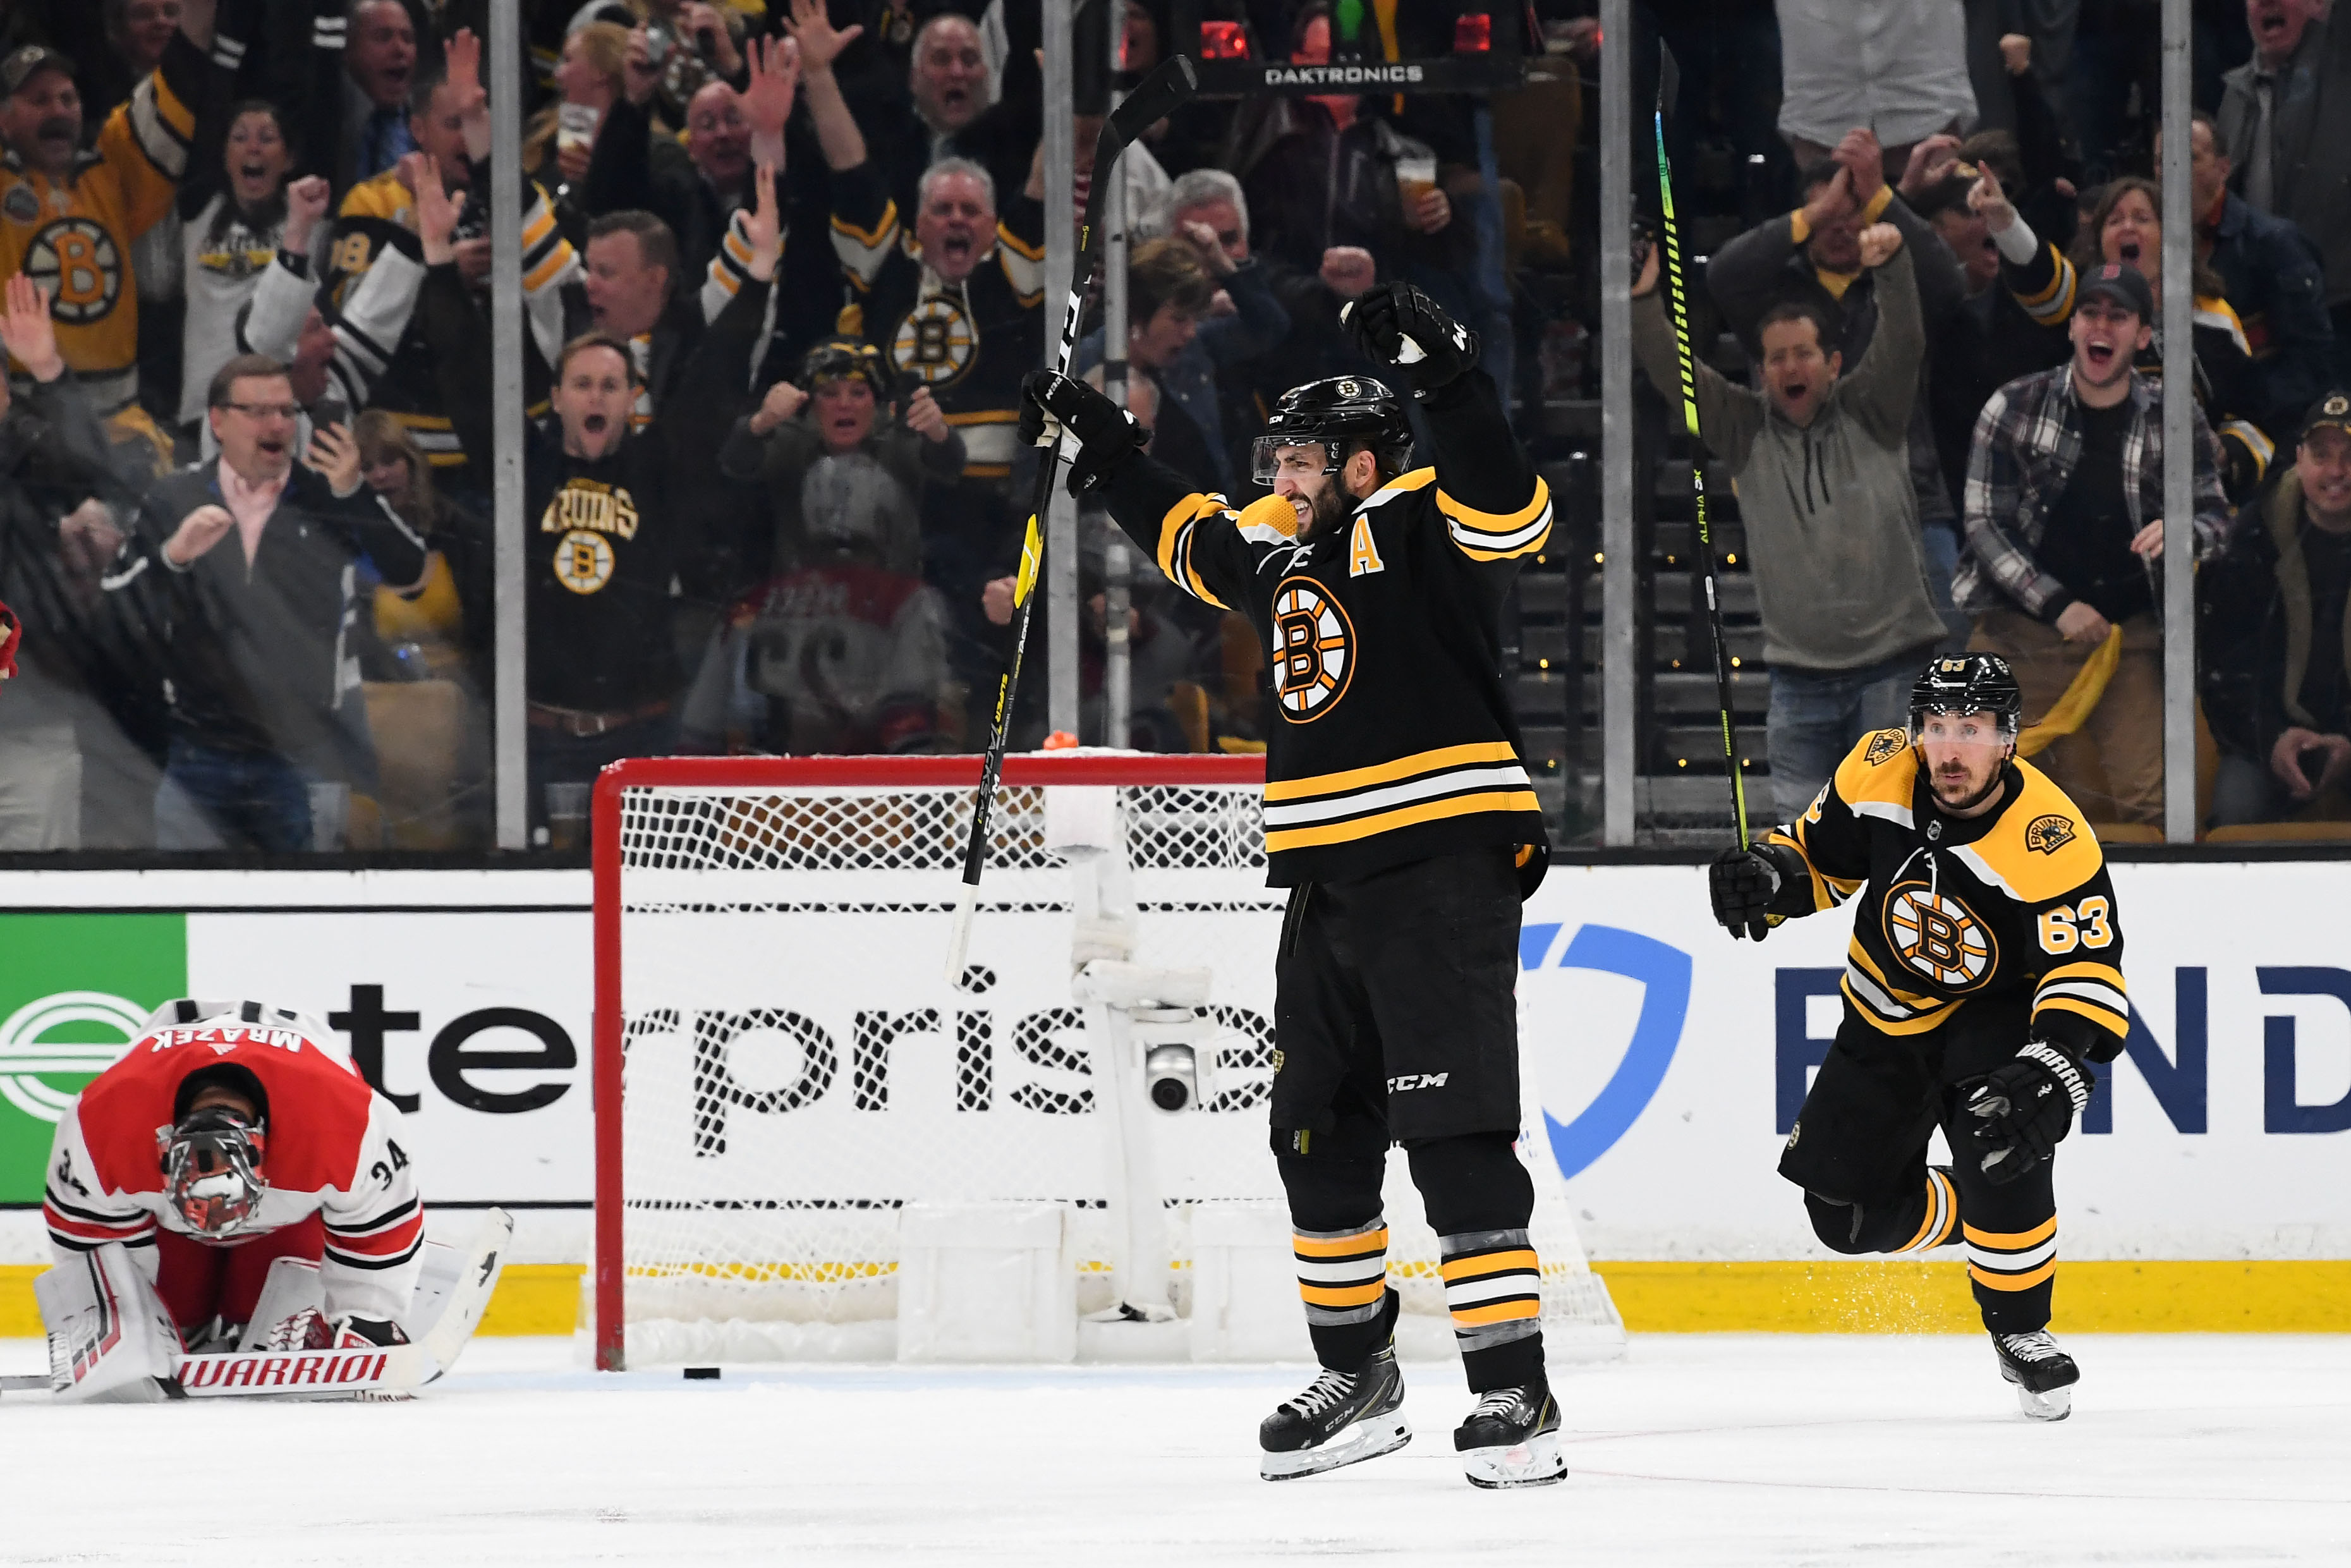 Bergeron Wins Game One in Double OT